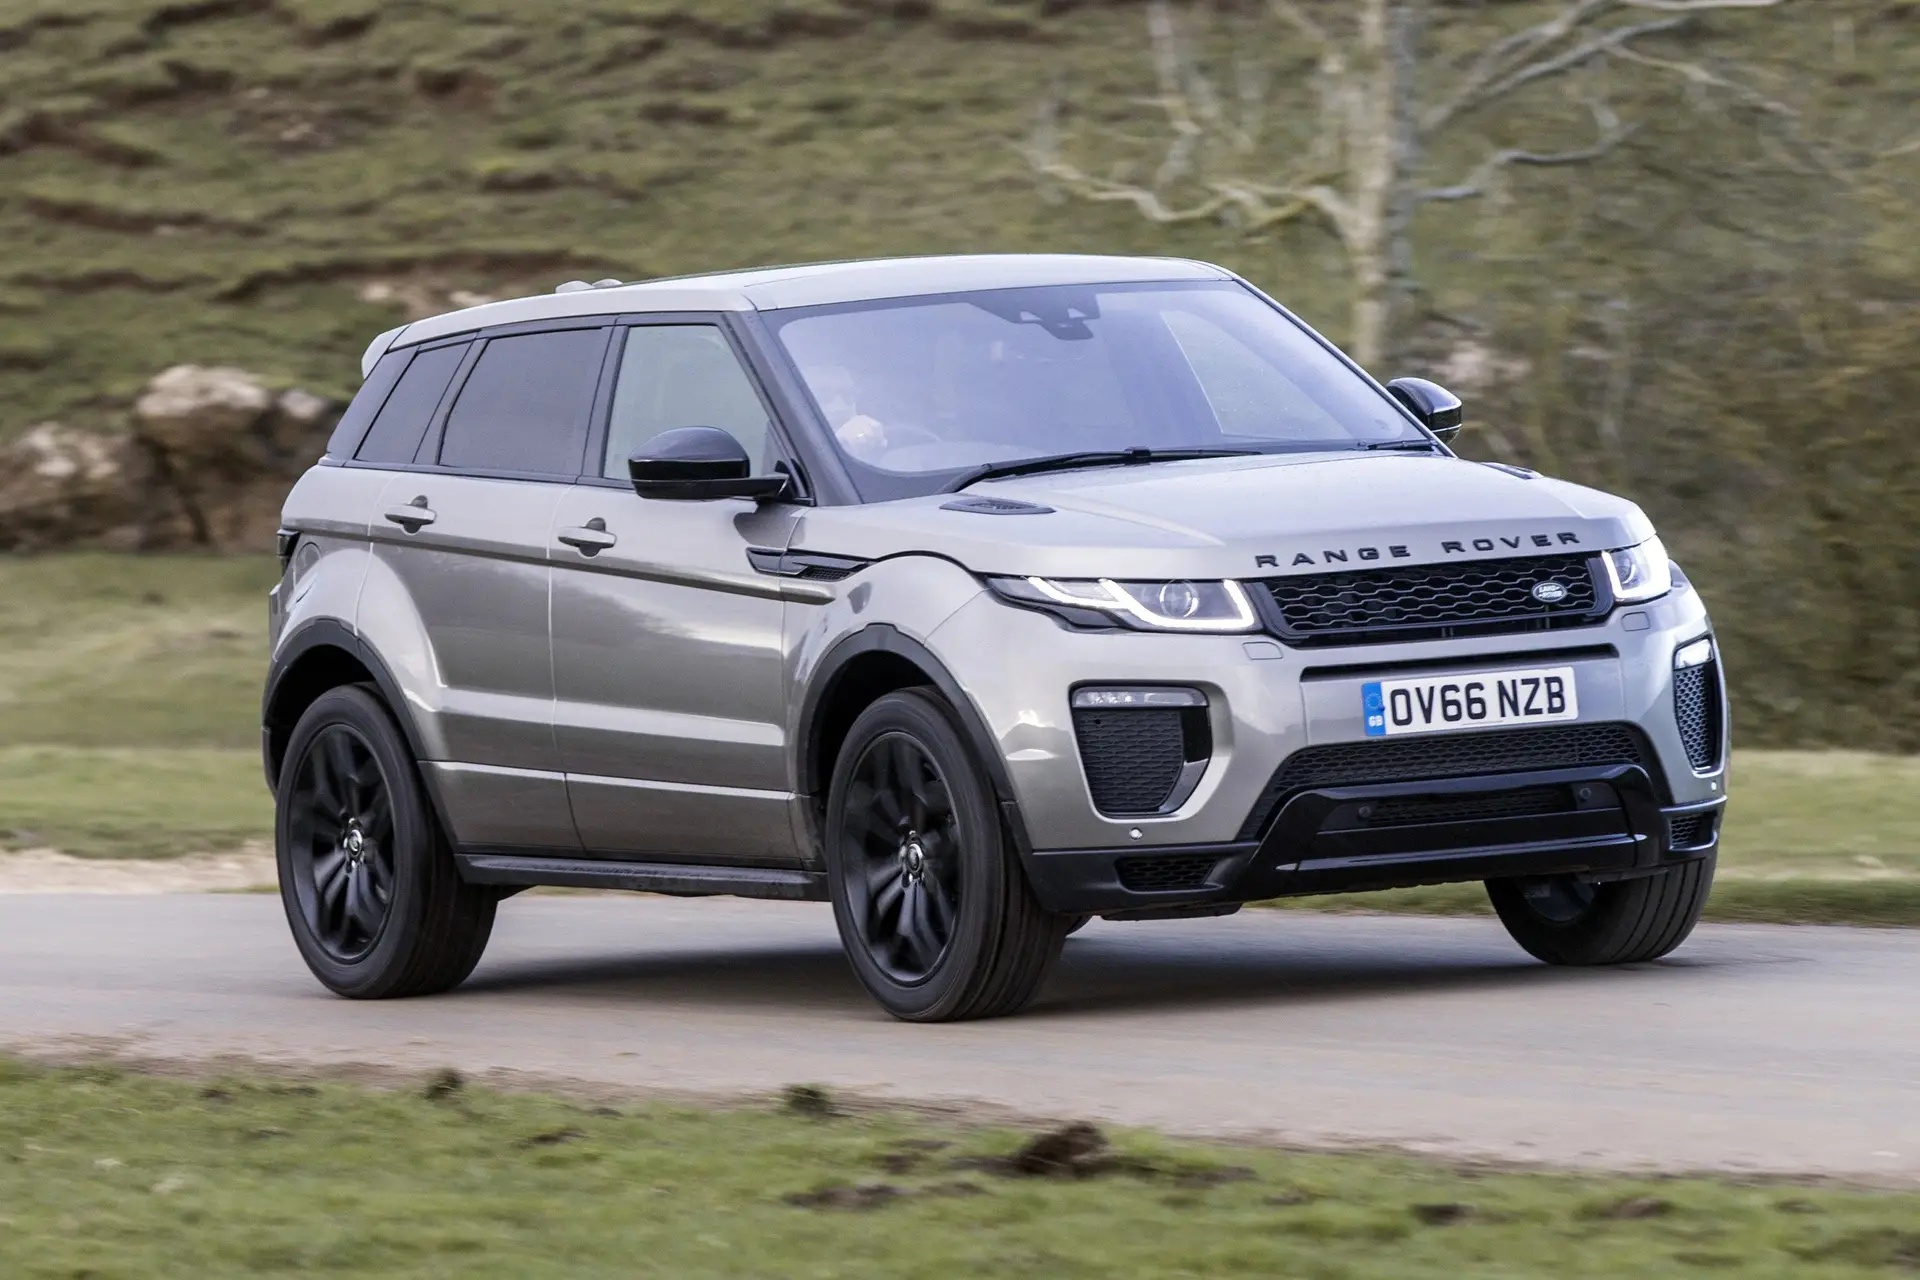 Range Rover Evoque (2011-2019) Review: exterior front three quarter photo of the Range Rover Evoque on the road